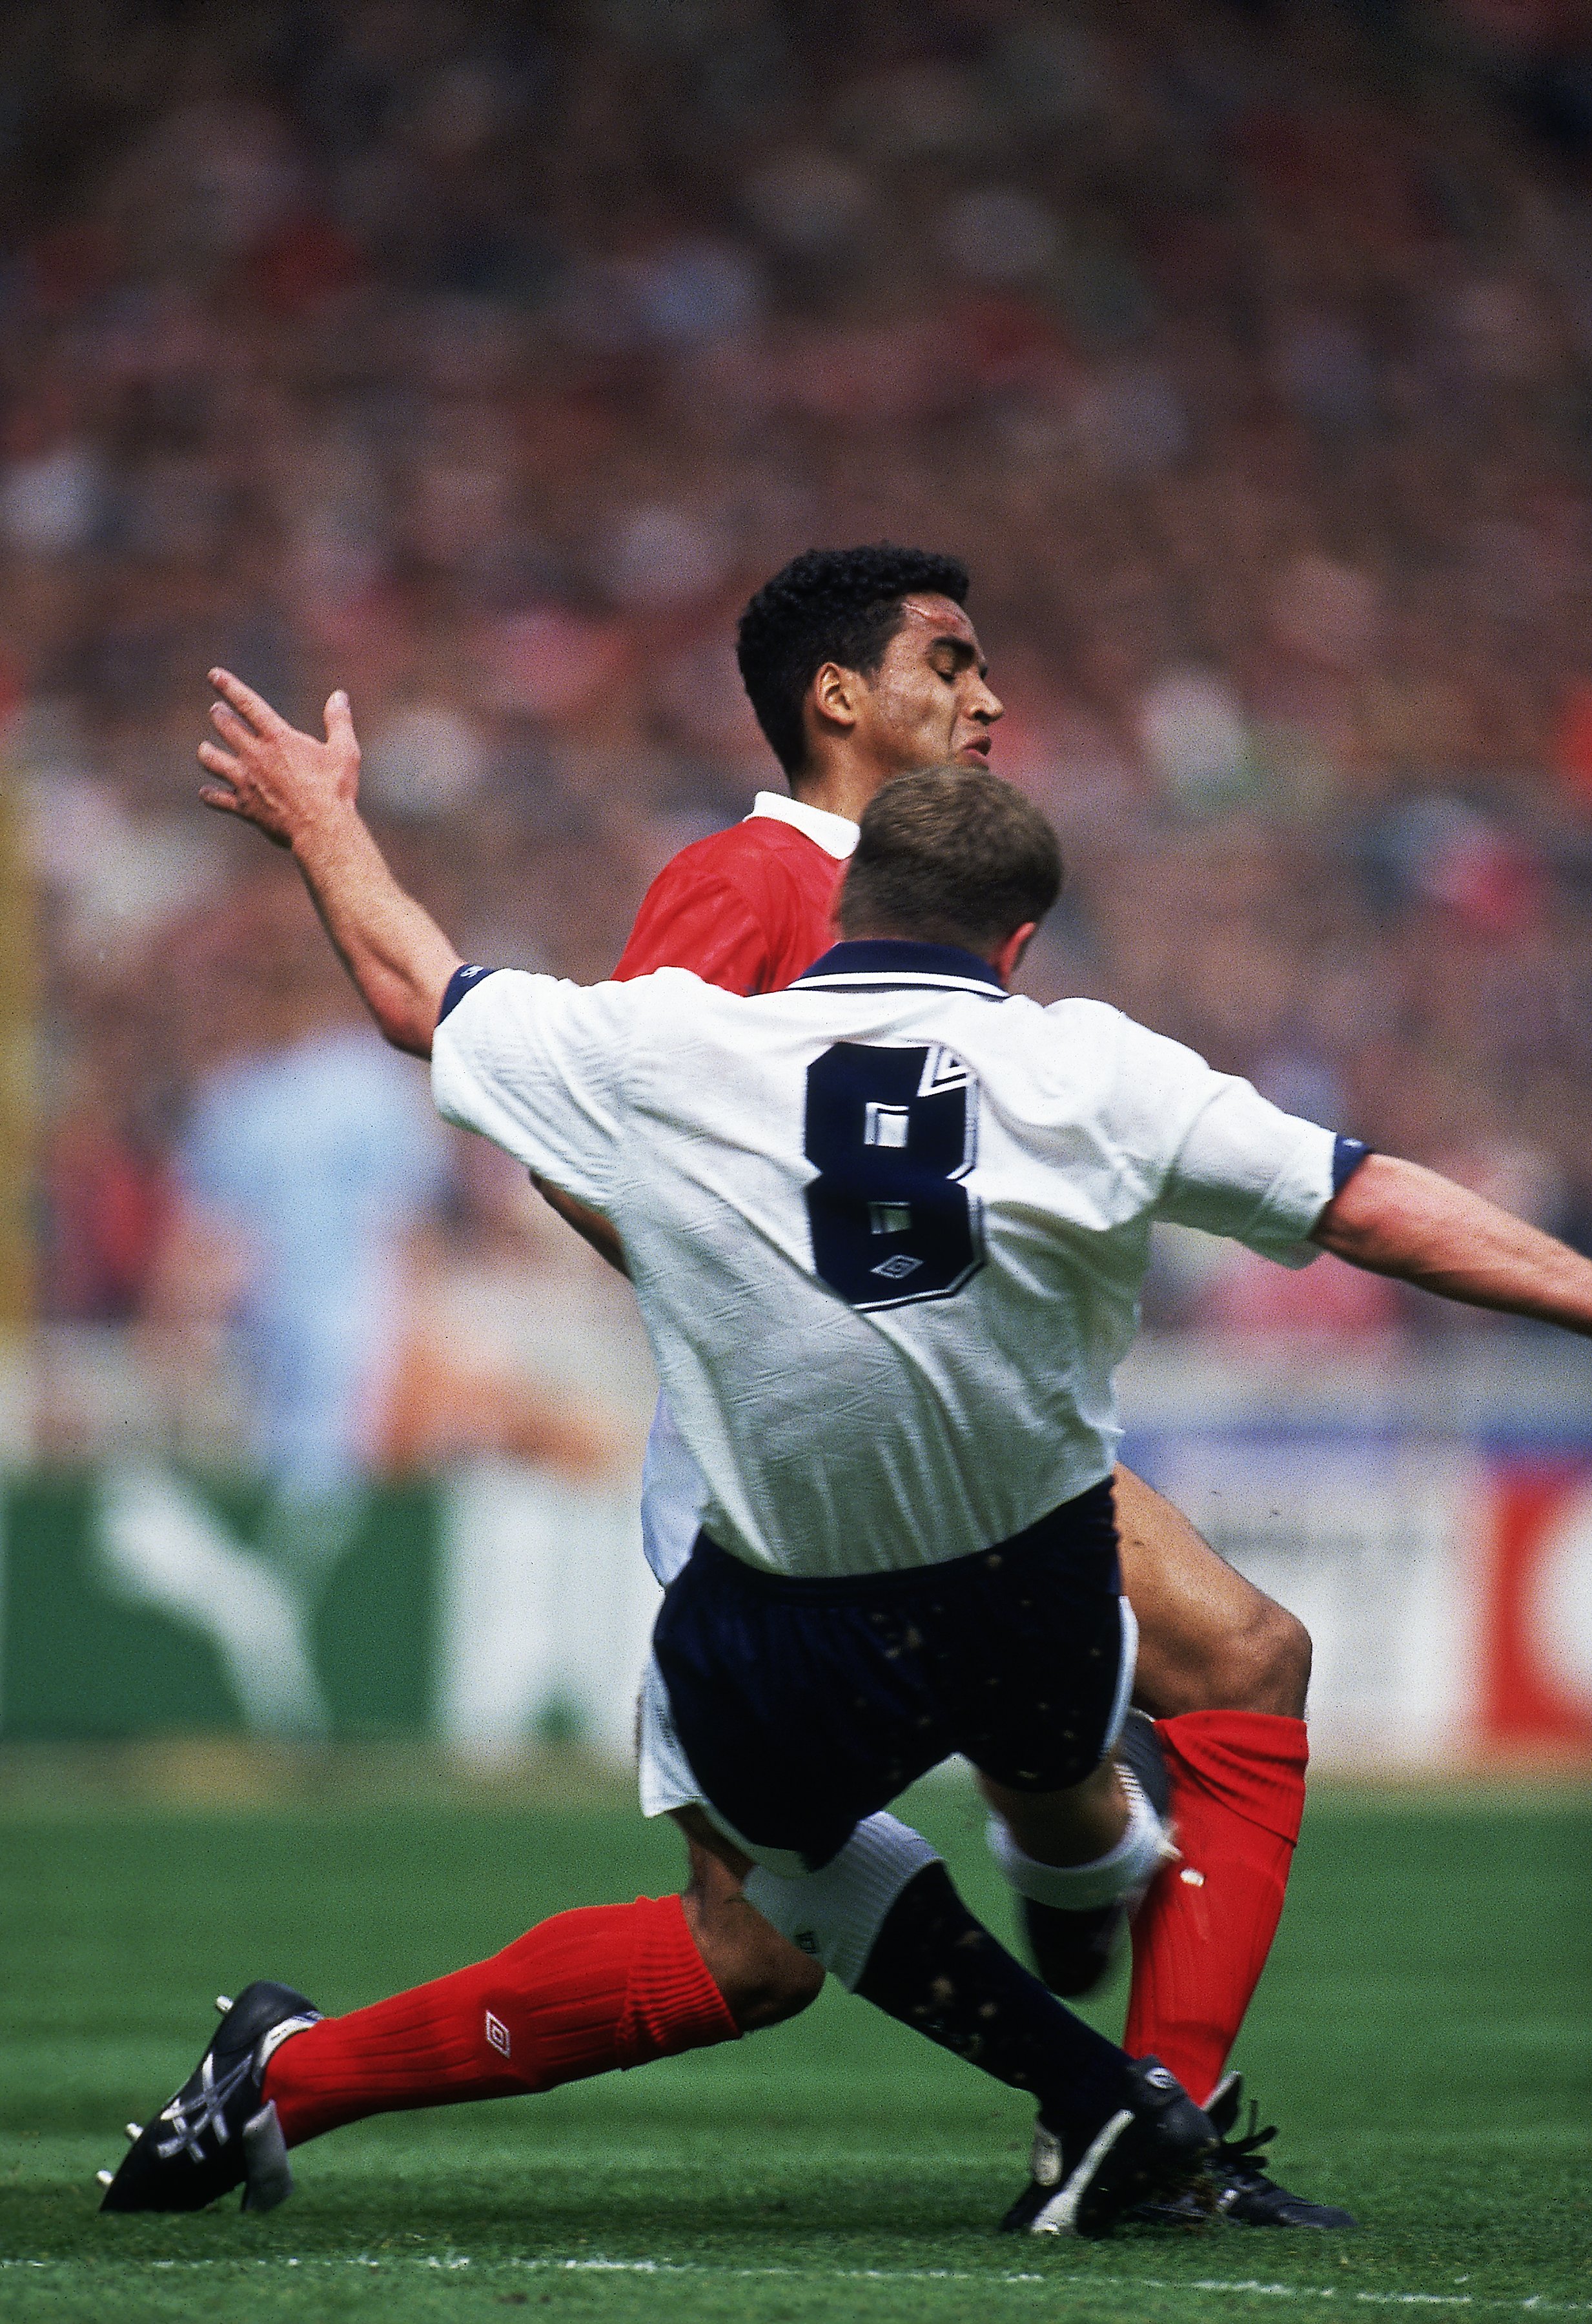 18 May 1991:  Paul Gascoigne of Tottenham Hotspur tackles Gary Charles of Nottingham Forest and comes off worse injuring himself and never really regaining his form from making this challenge during the FA Cup Final played at Wembley Stadium, in London.To